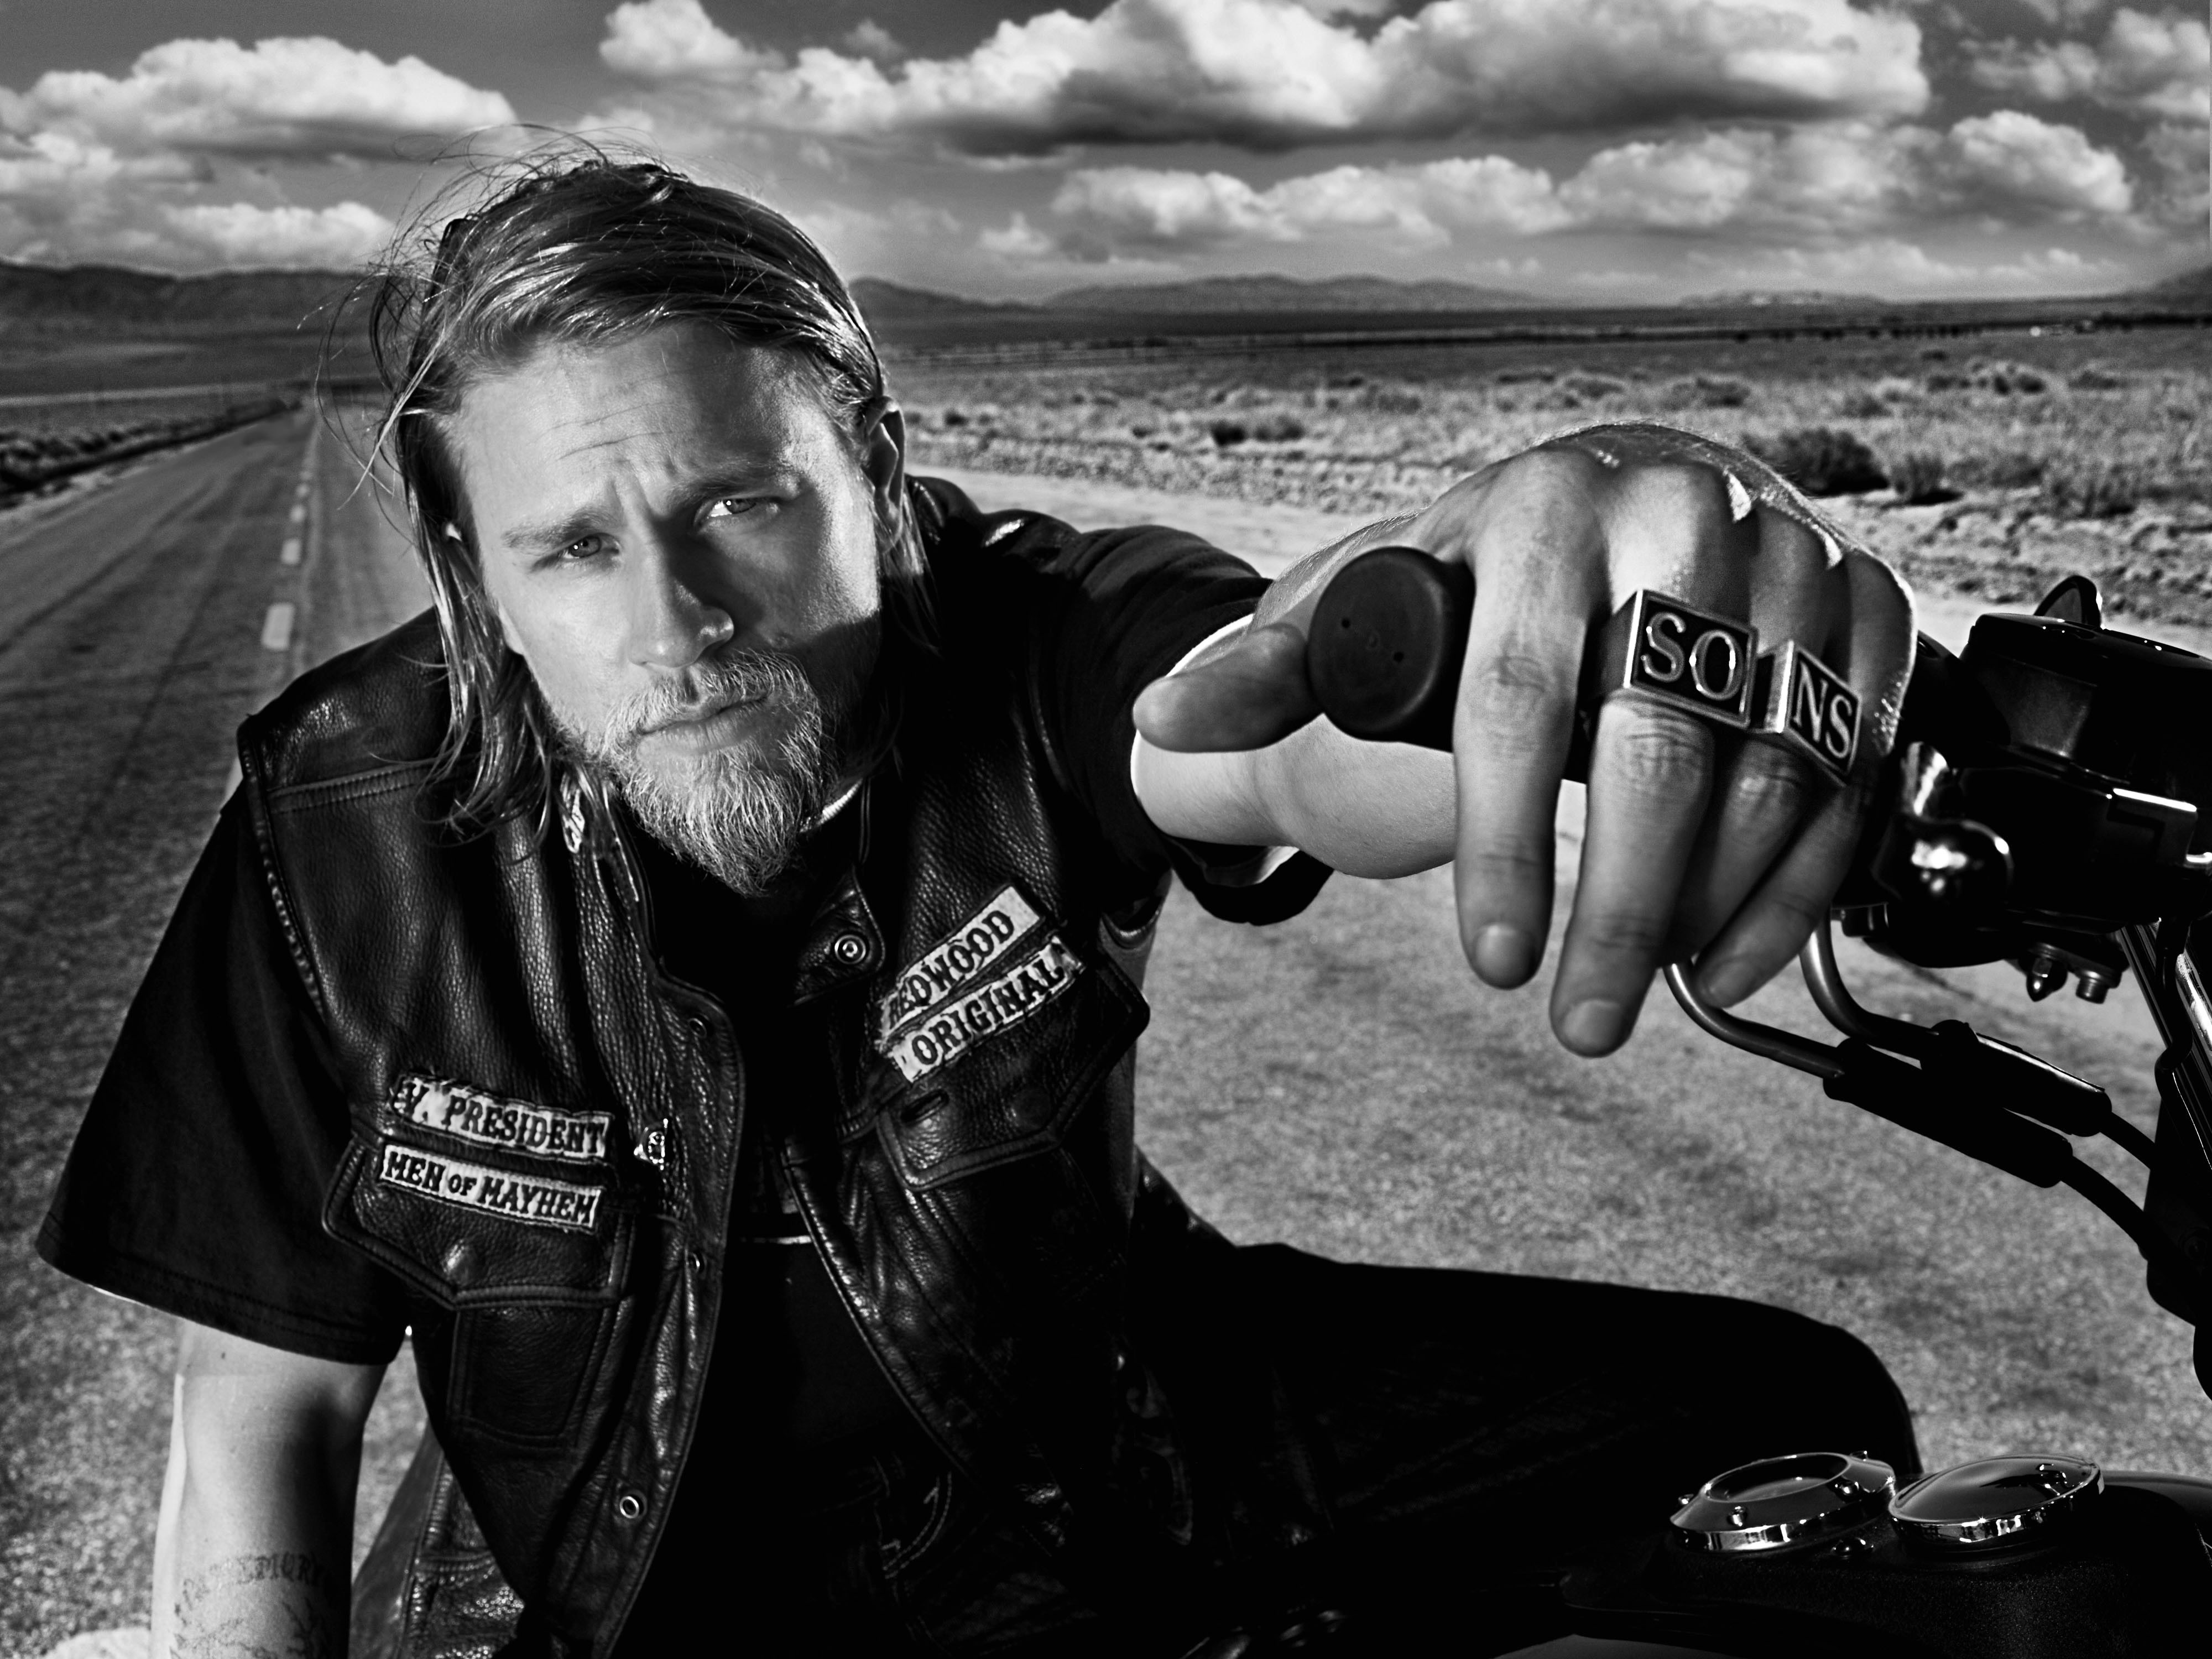  Sons Of Anarchy Tablet Wallpapers